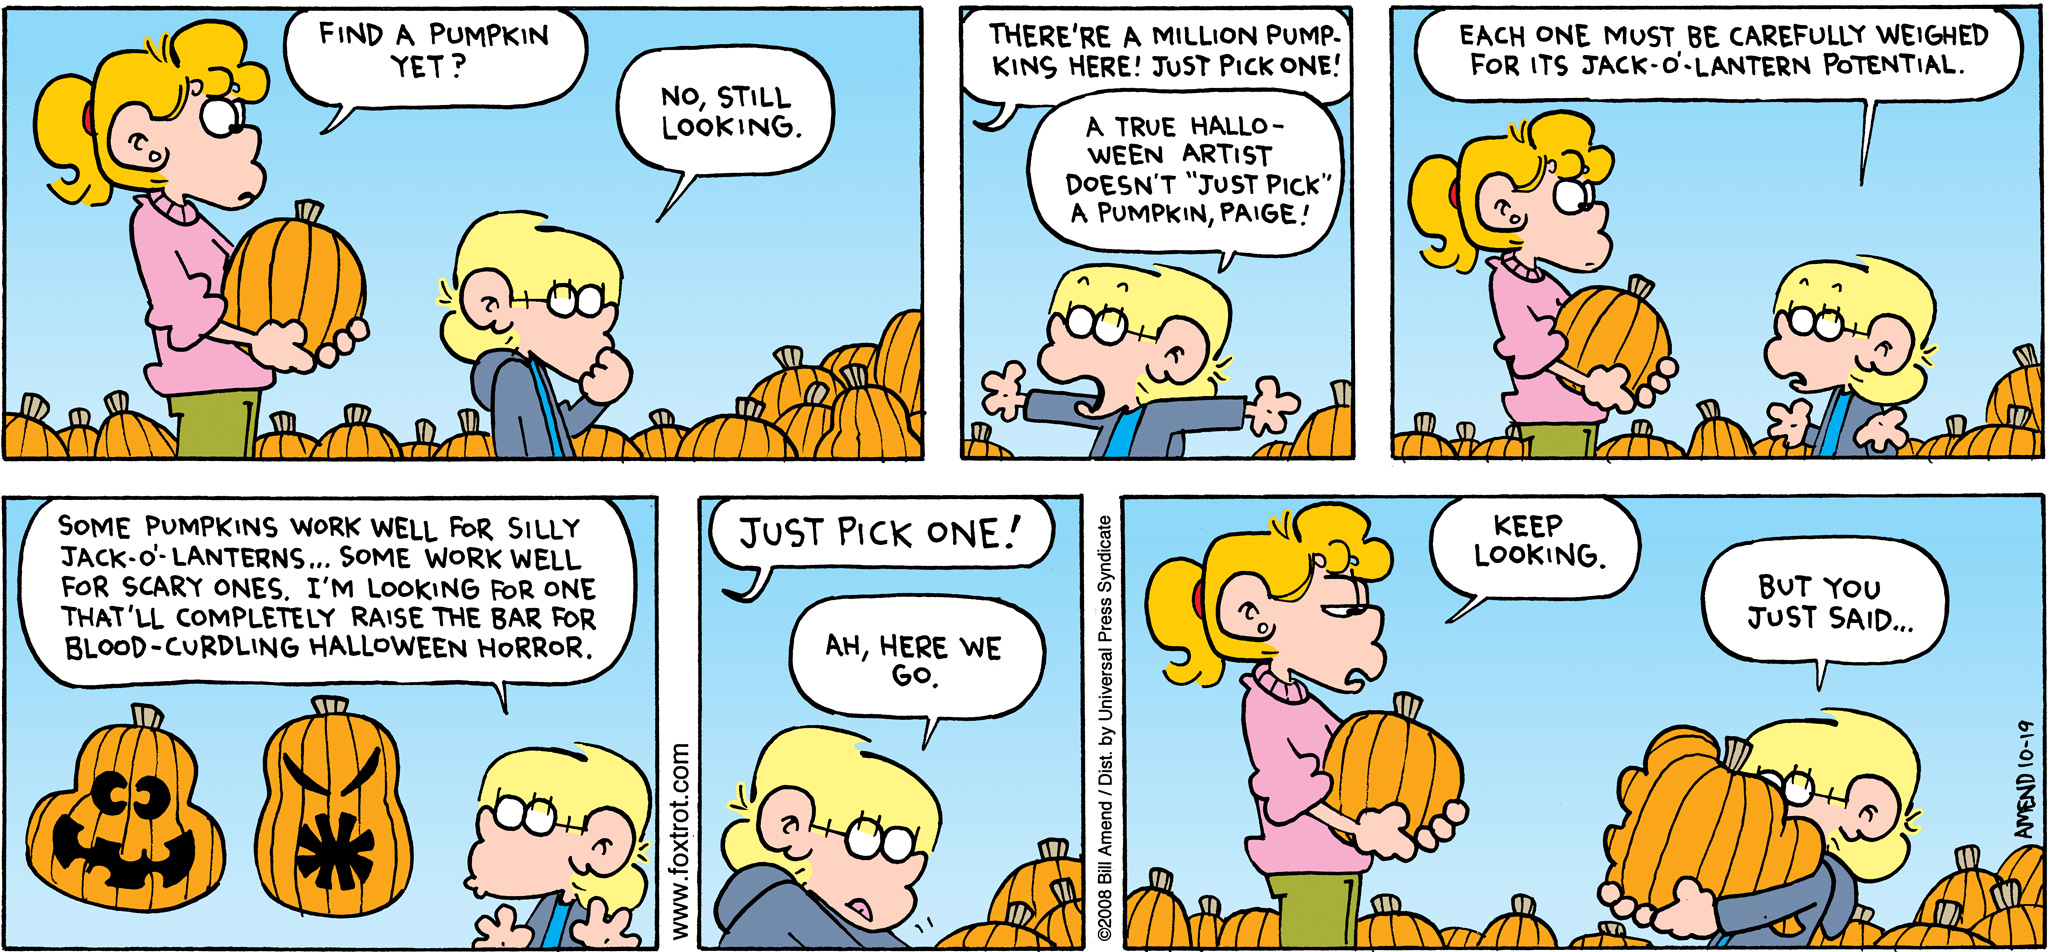 Halloween Comics - FoxTrot comic strip by Bill Amend - Published October 19, 2008 - Paige Fox: Find a pumpkin yet? Jason Fox: No, still looking. Paige Fox: There're a million pumpkins here! Just pick one! Jason Fox: A true Halloween artist doesn't "just pick" a pumpkin, Paige! Each one must be carefully weighed for its Jack-o'-Lantern potential. Some pumpkins work well for silly Jack-o'-Lanterns... some work well for scary ones. I'm looking for one that'll completely raise the bar for blood-curdling Halloween horror. Paige Fox: Just pick one! Jason Fox: Ah, here we go. Paige Fox: Keep looking. Jason Fox: But you just said...